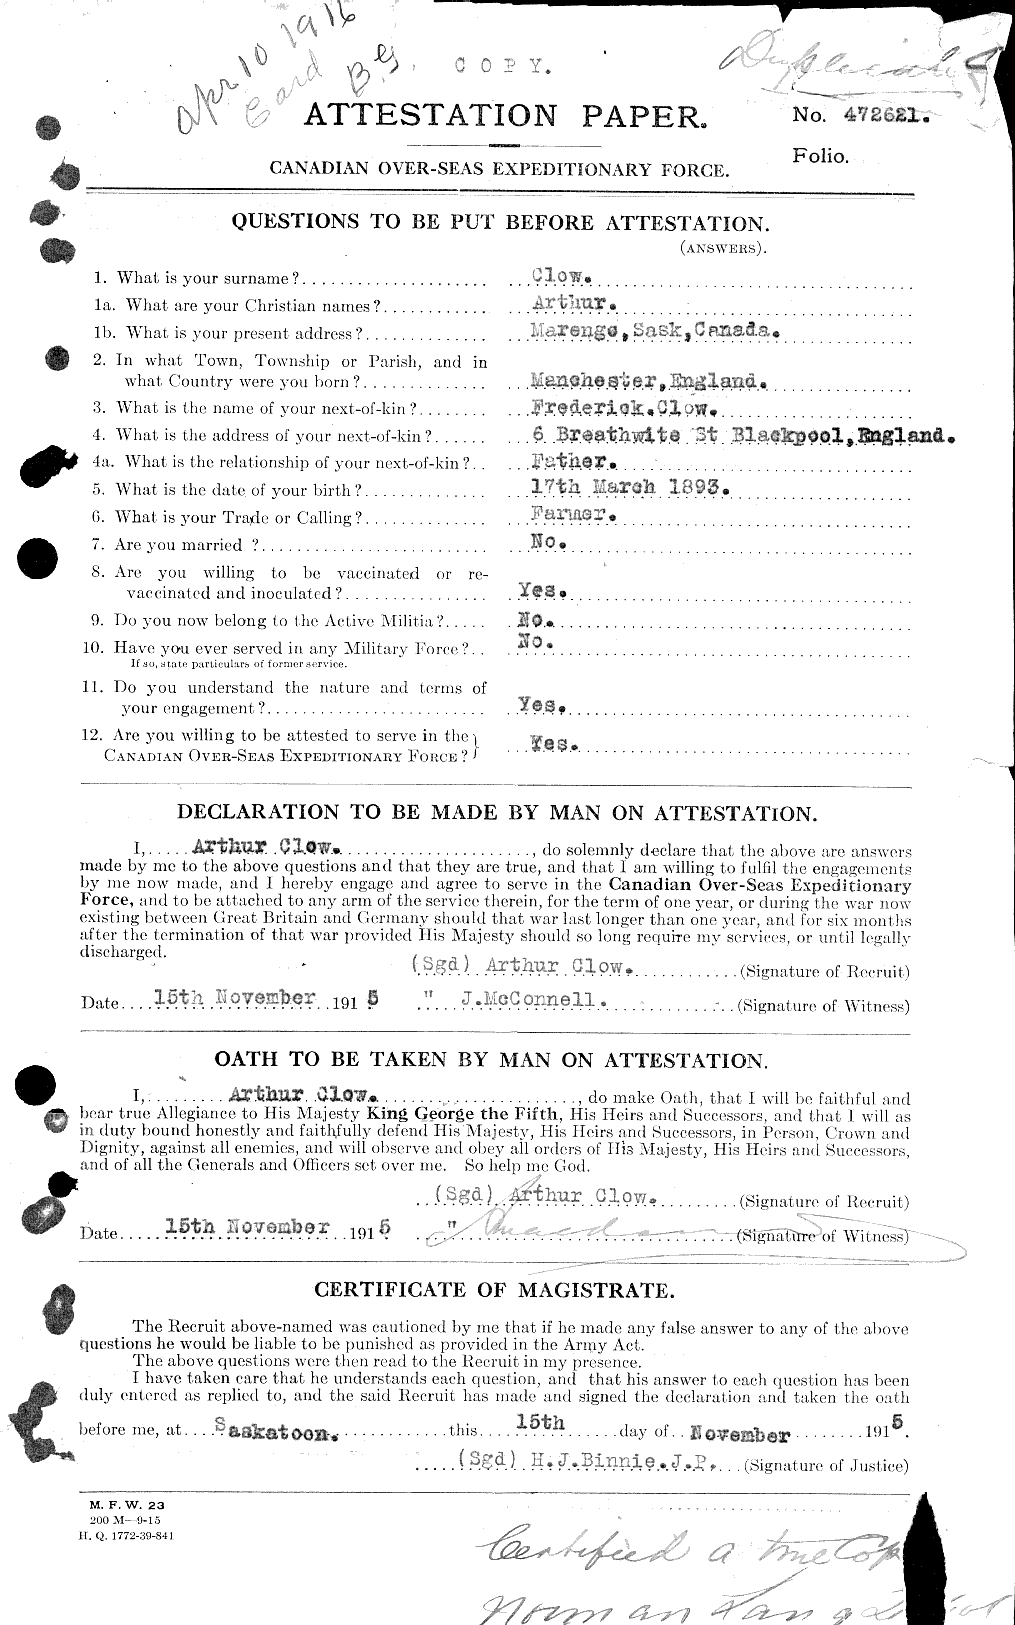 Personnel Records of the First World War - CEF 025571a